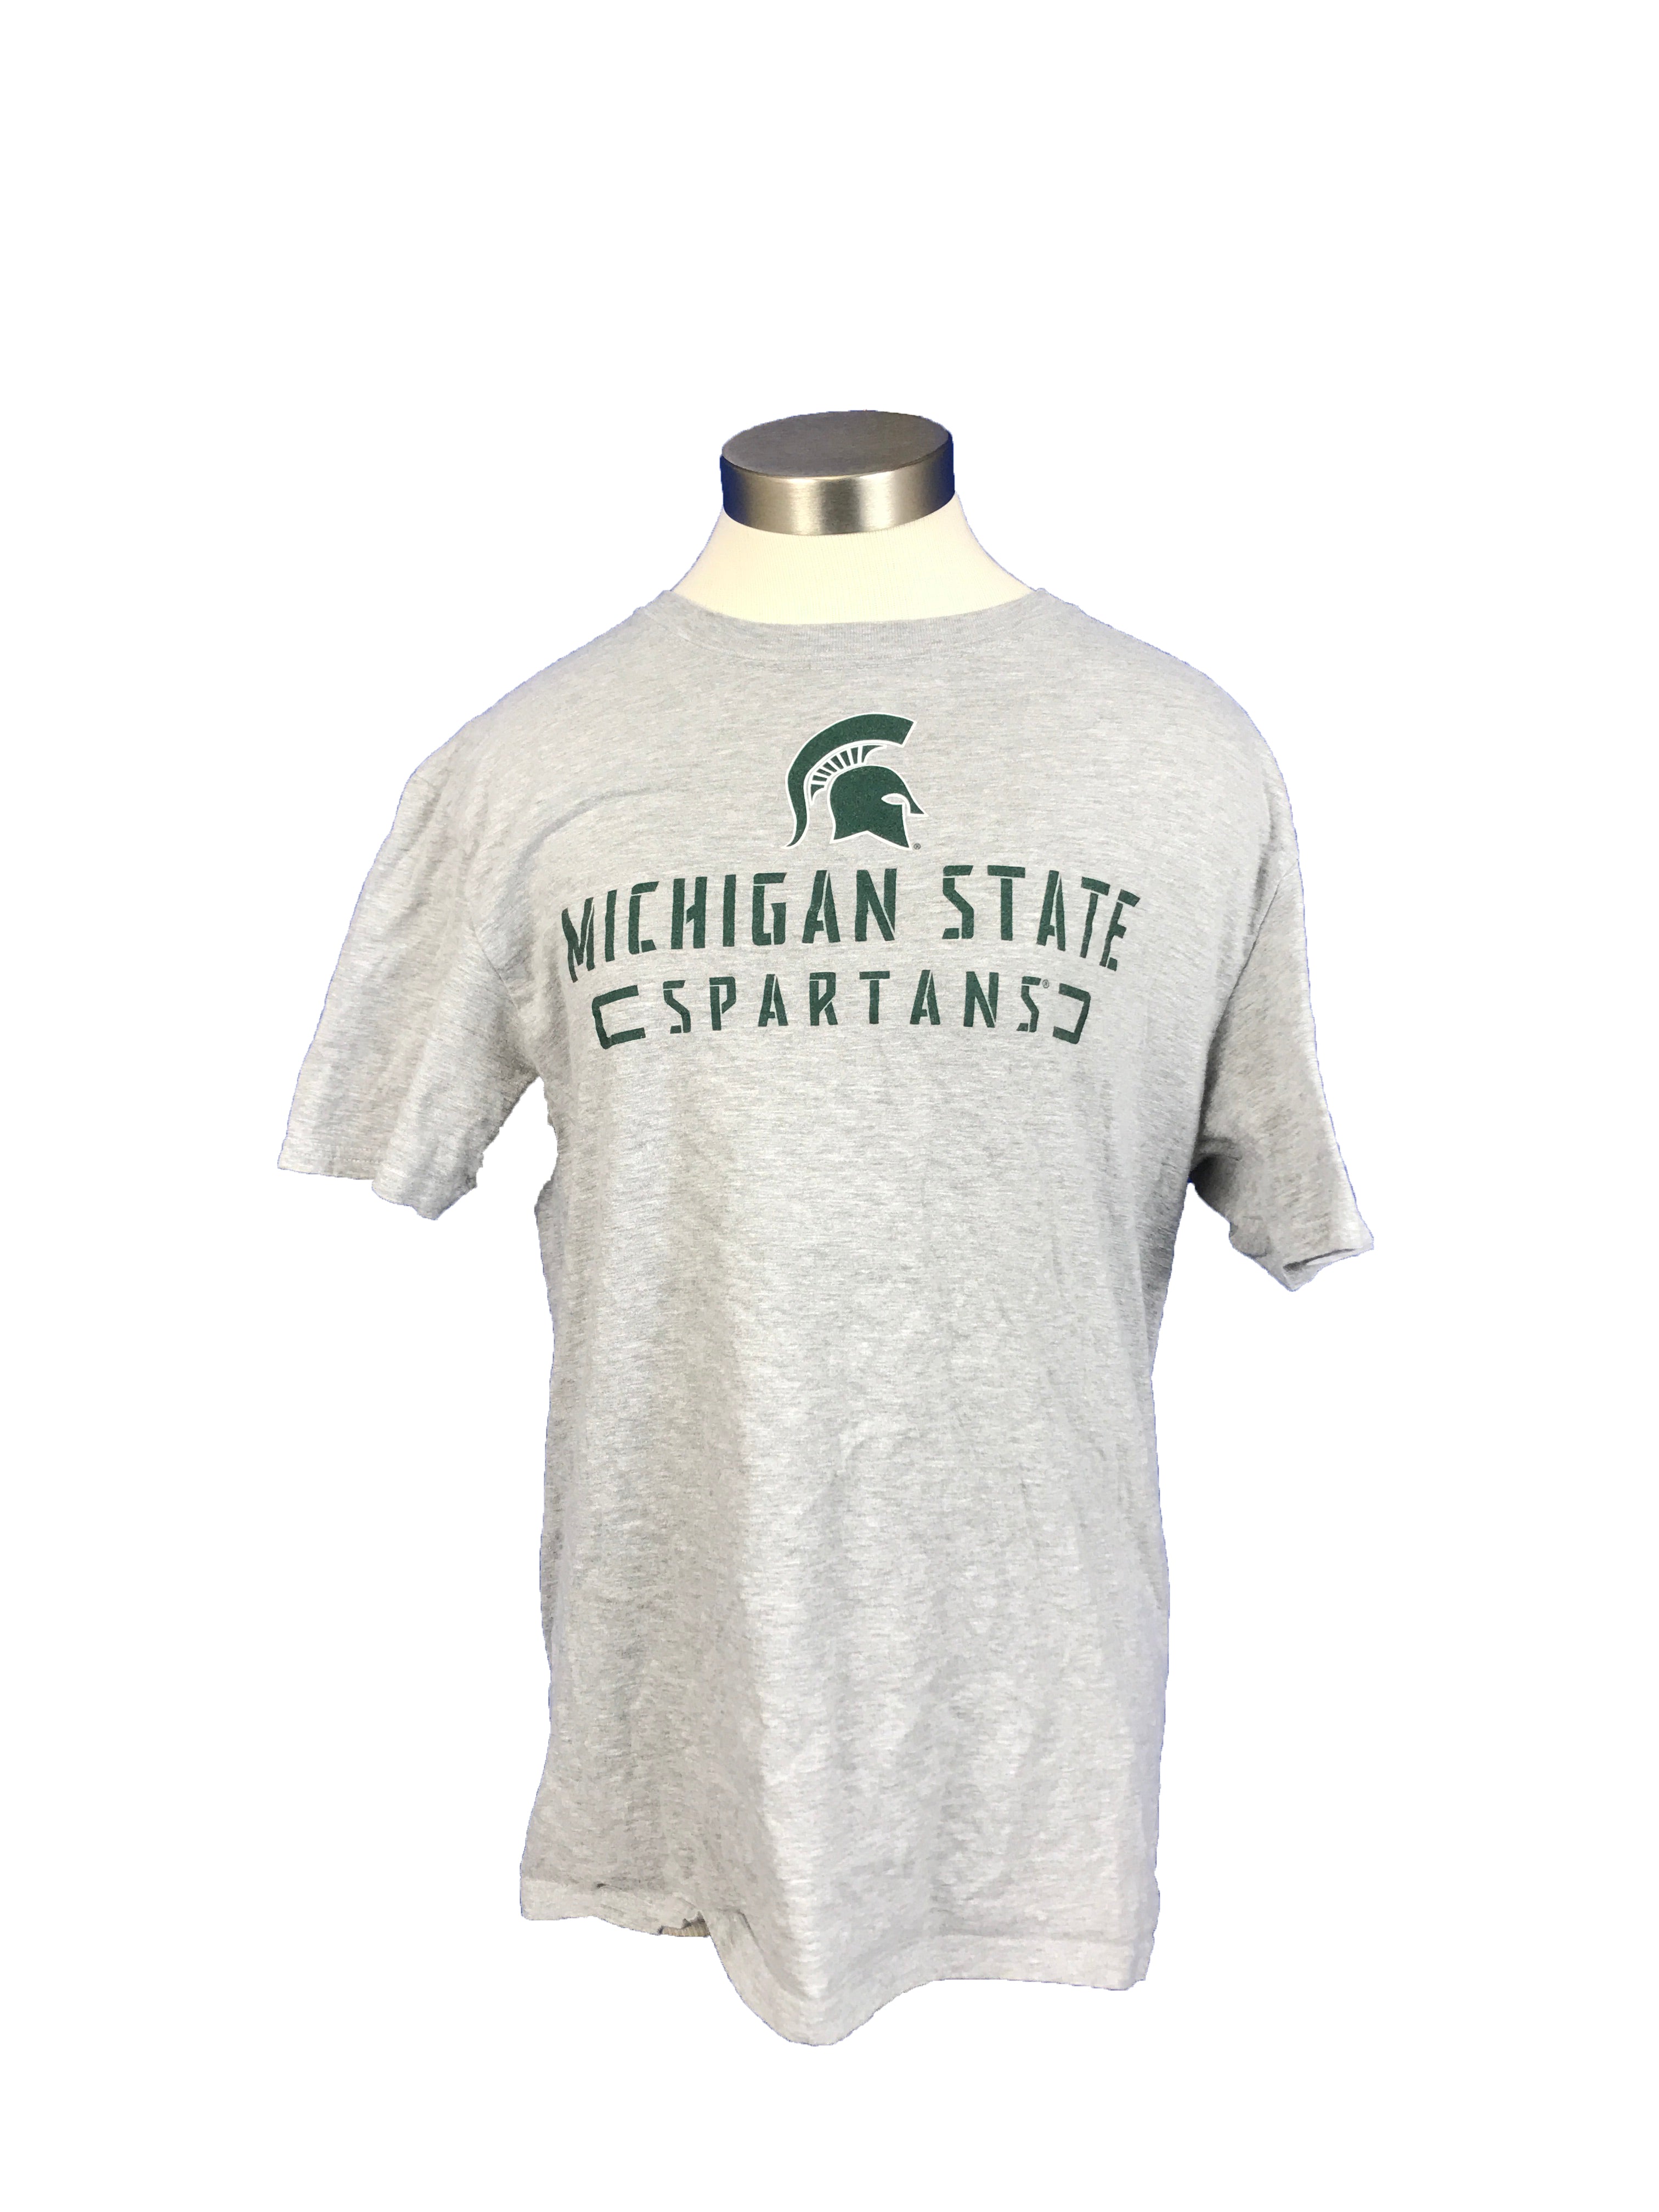 Grey Michigan State Spartans T-Shirt Unisex Size L